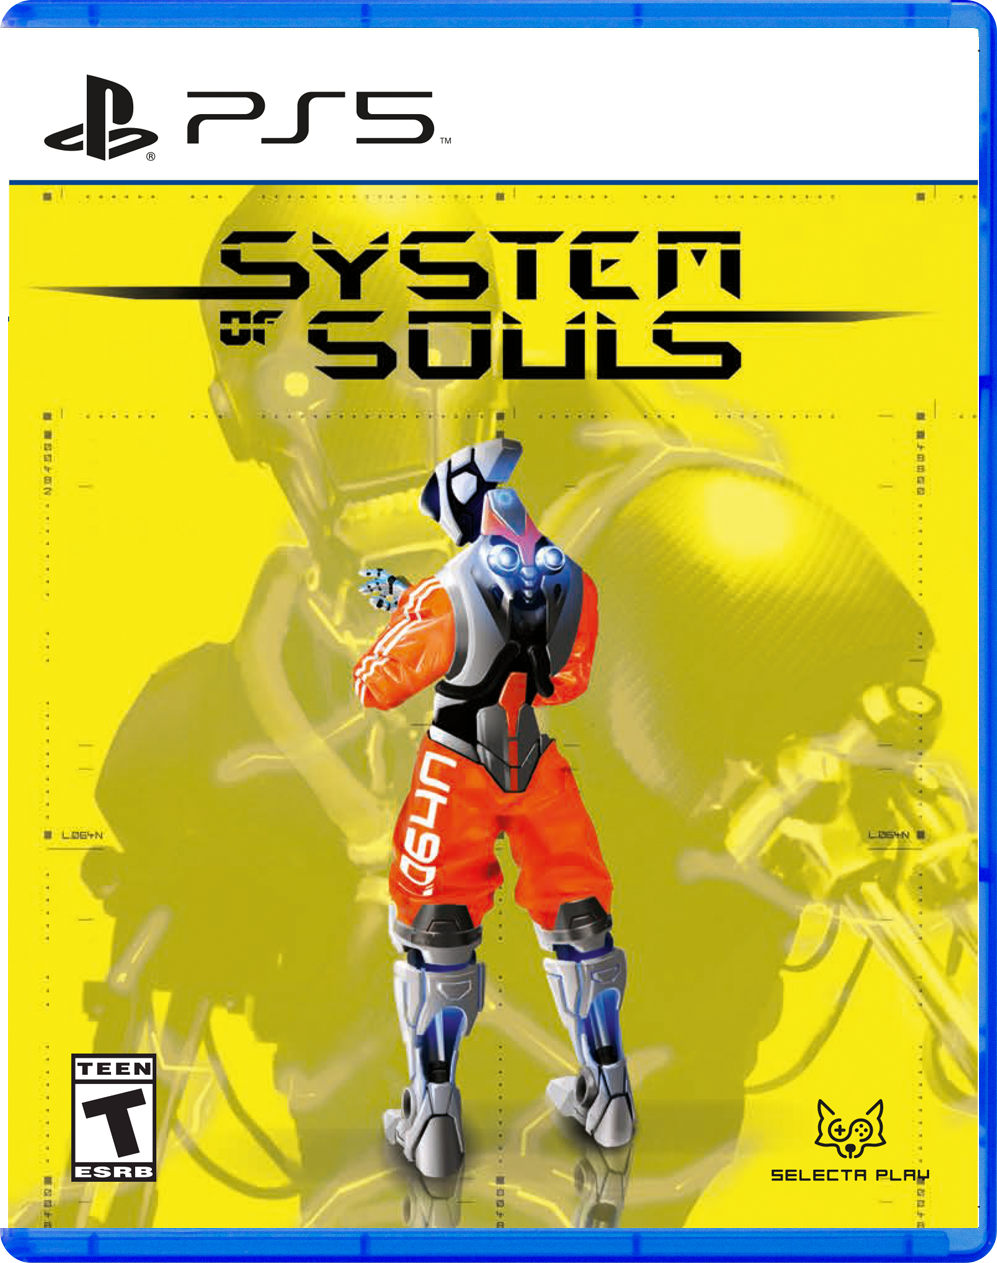 System of Souls - PlayStation 5